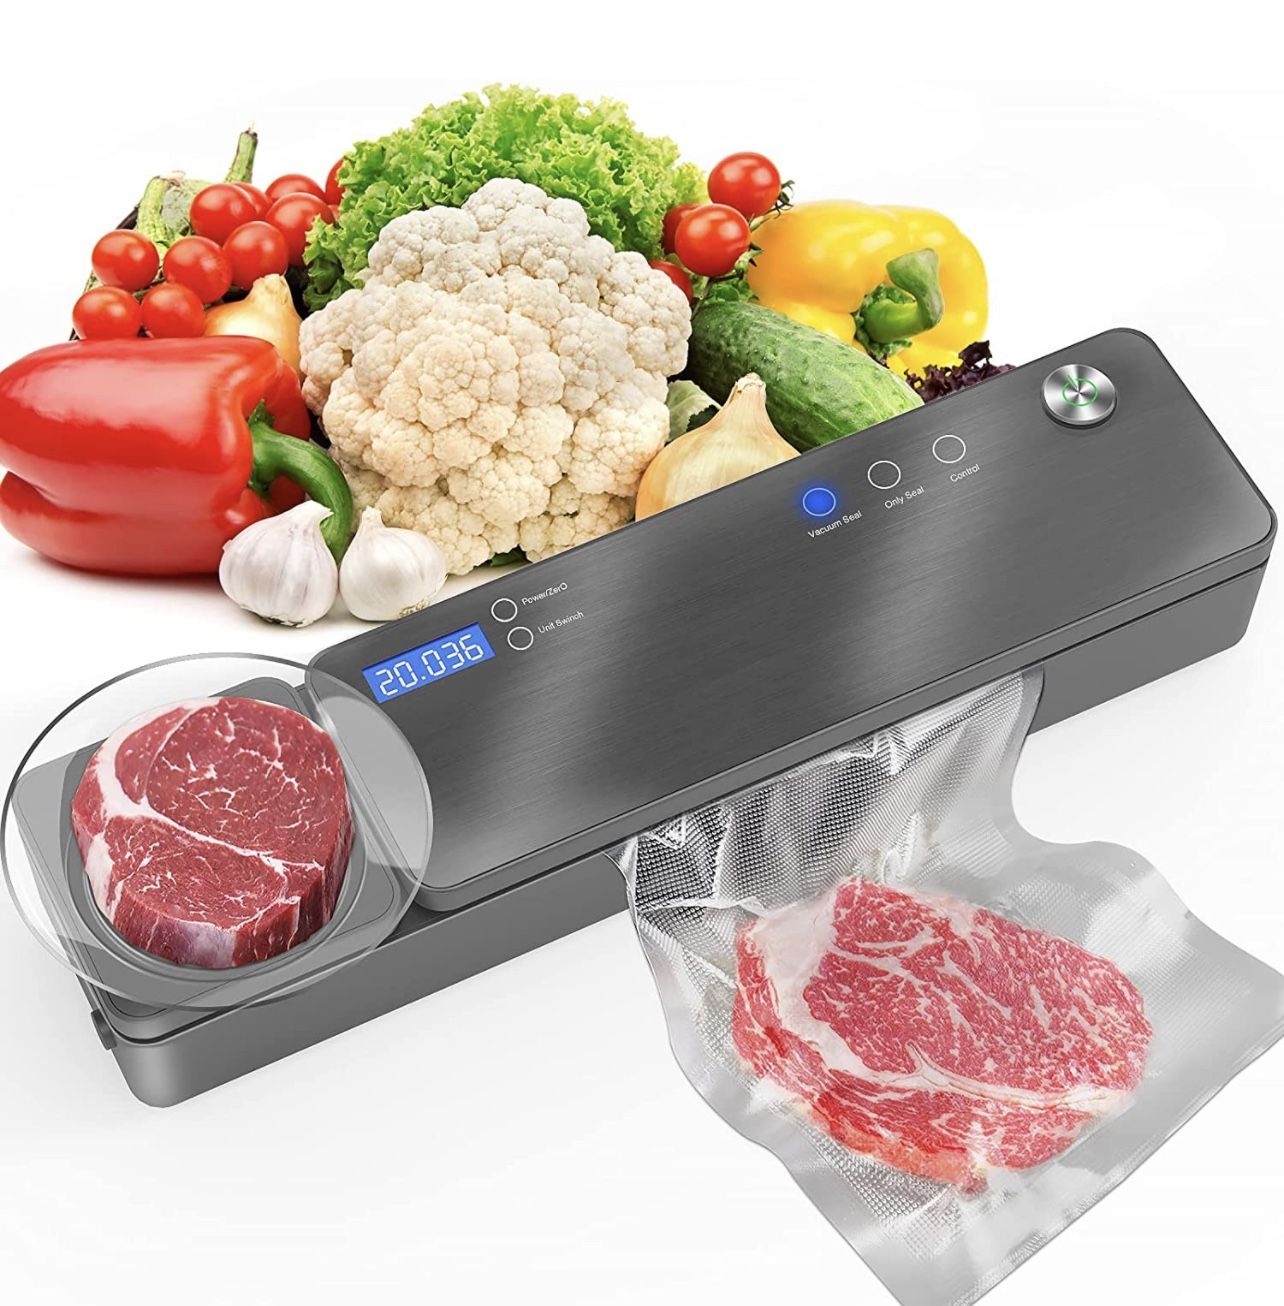 Vacuum Sealer, Automatic Vacuum Sealer Machine for Food Prep with Kitchen Food Scale, LCD Display, Dry Moist Food Modes, Cutter, Touch Control, Vacuum